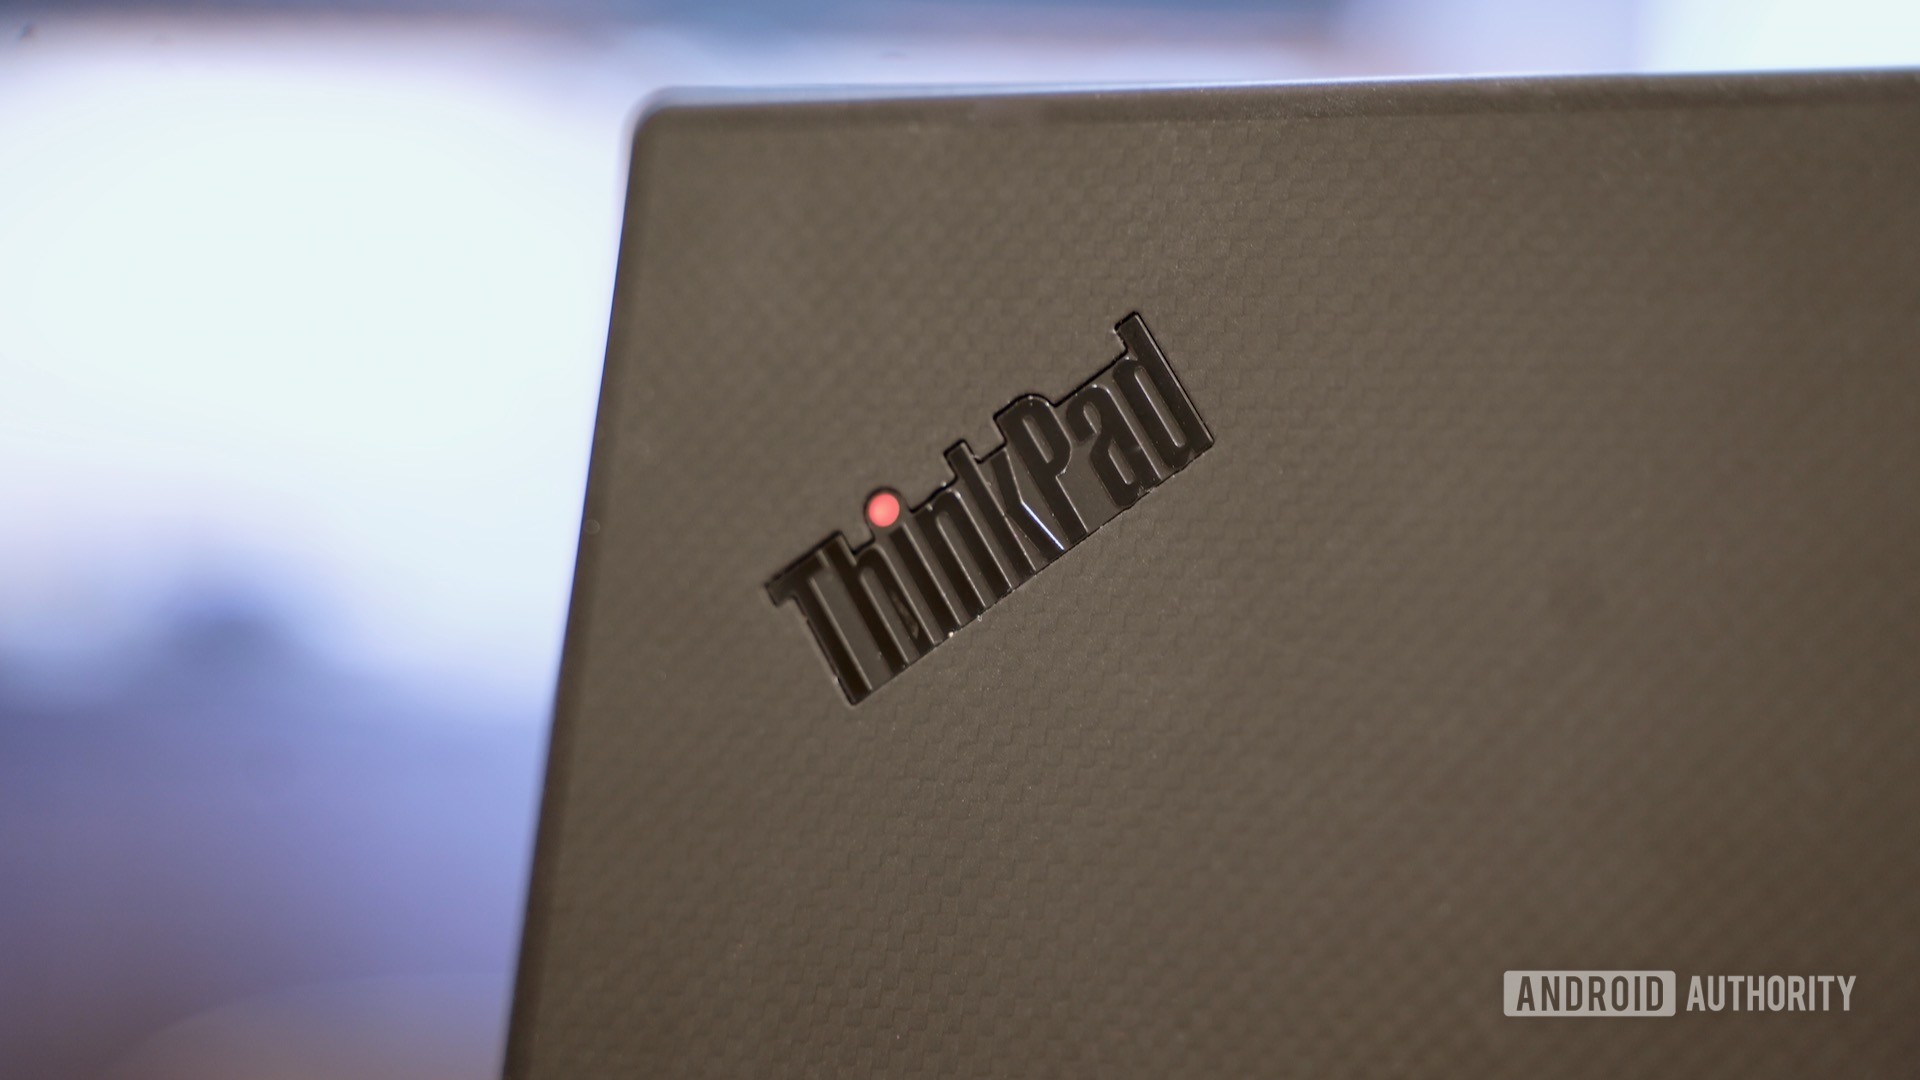 Lenovo ThinkPad X1 Carbon review logo closeup with red dot